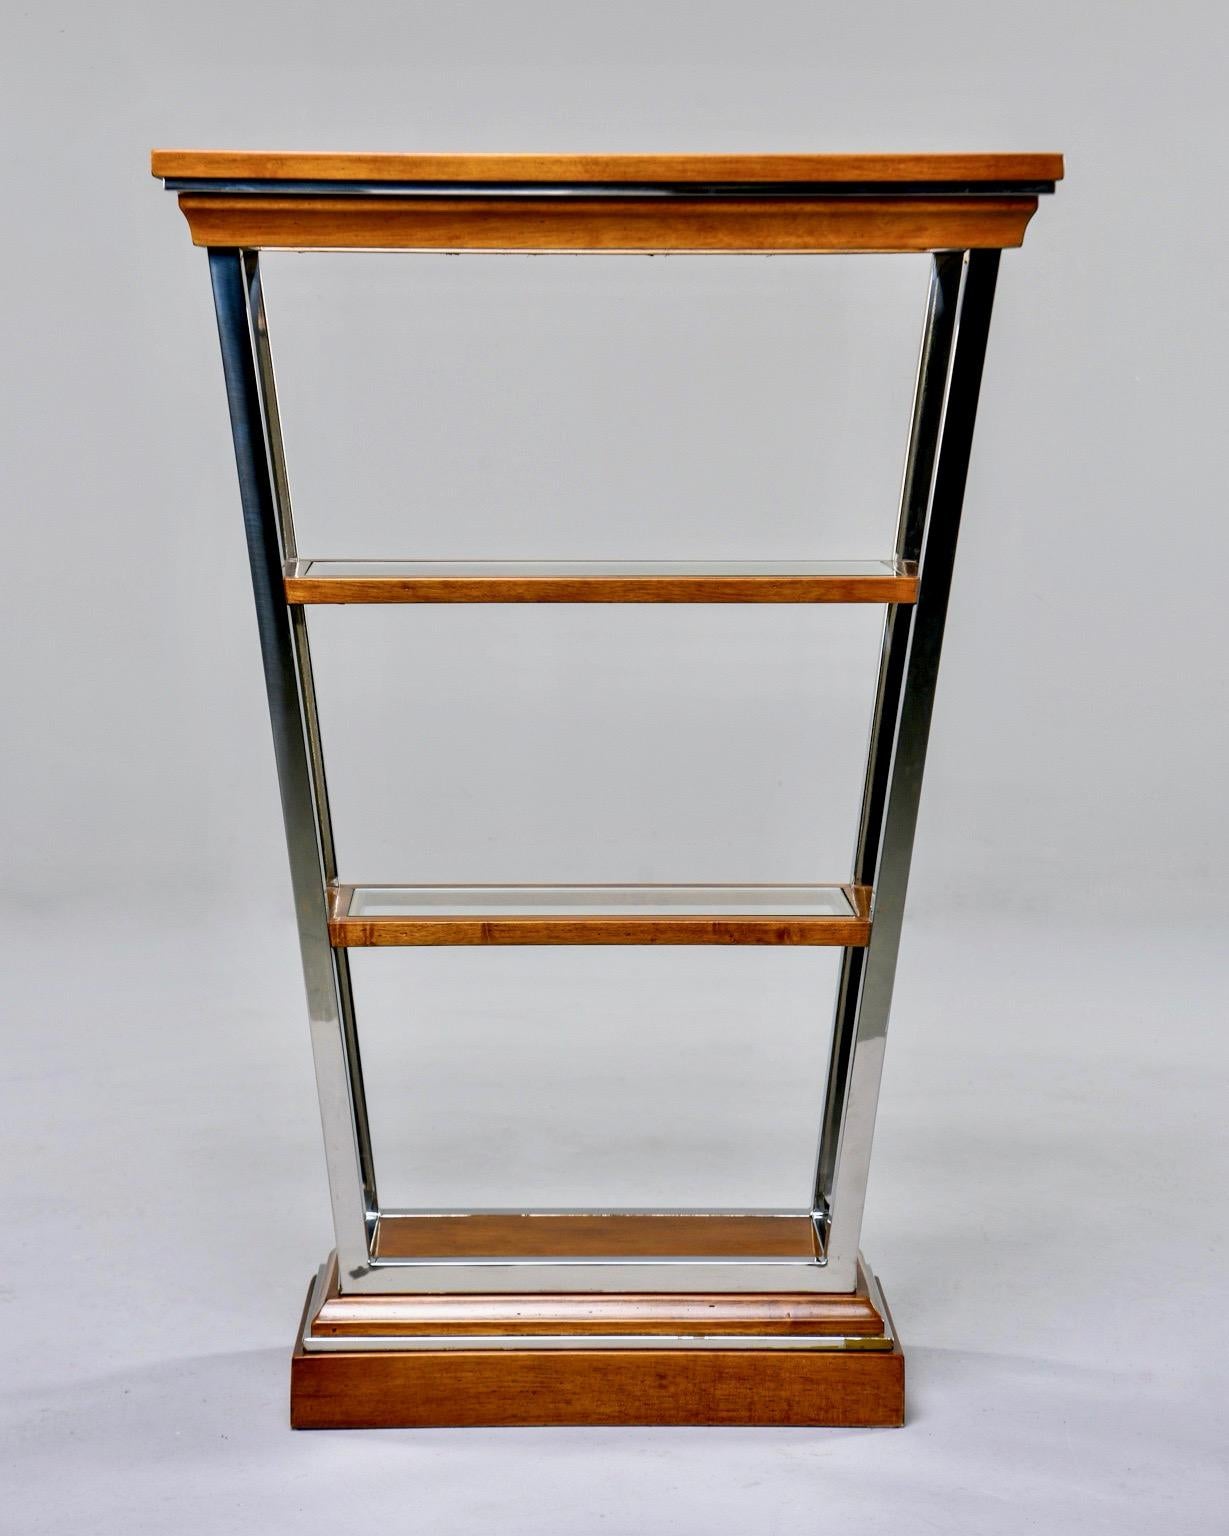 Brazilian étagère features four shelves in V-Form with chrome trim and glass insert shelves, circa 1970s. Unknown maker. Very good vintage condition.